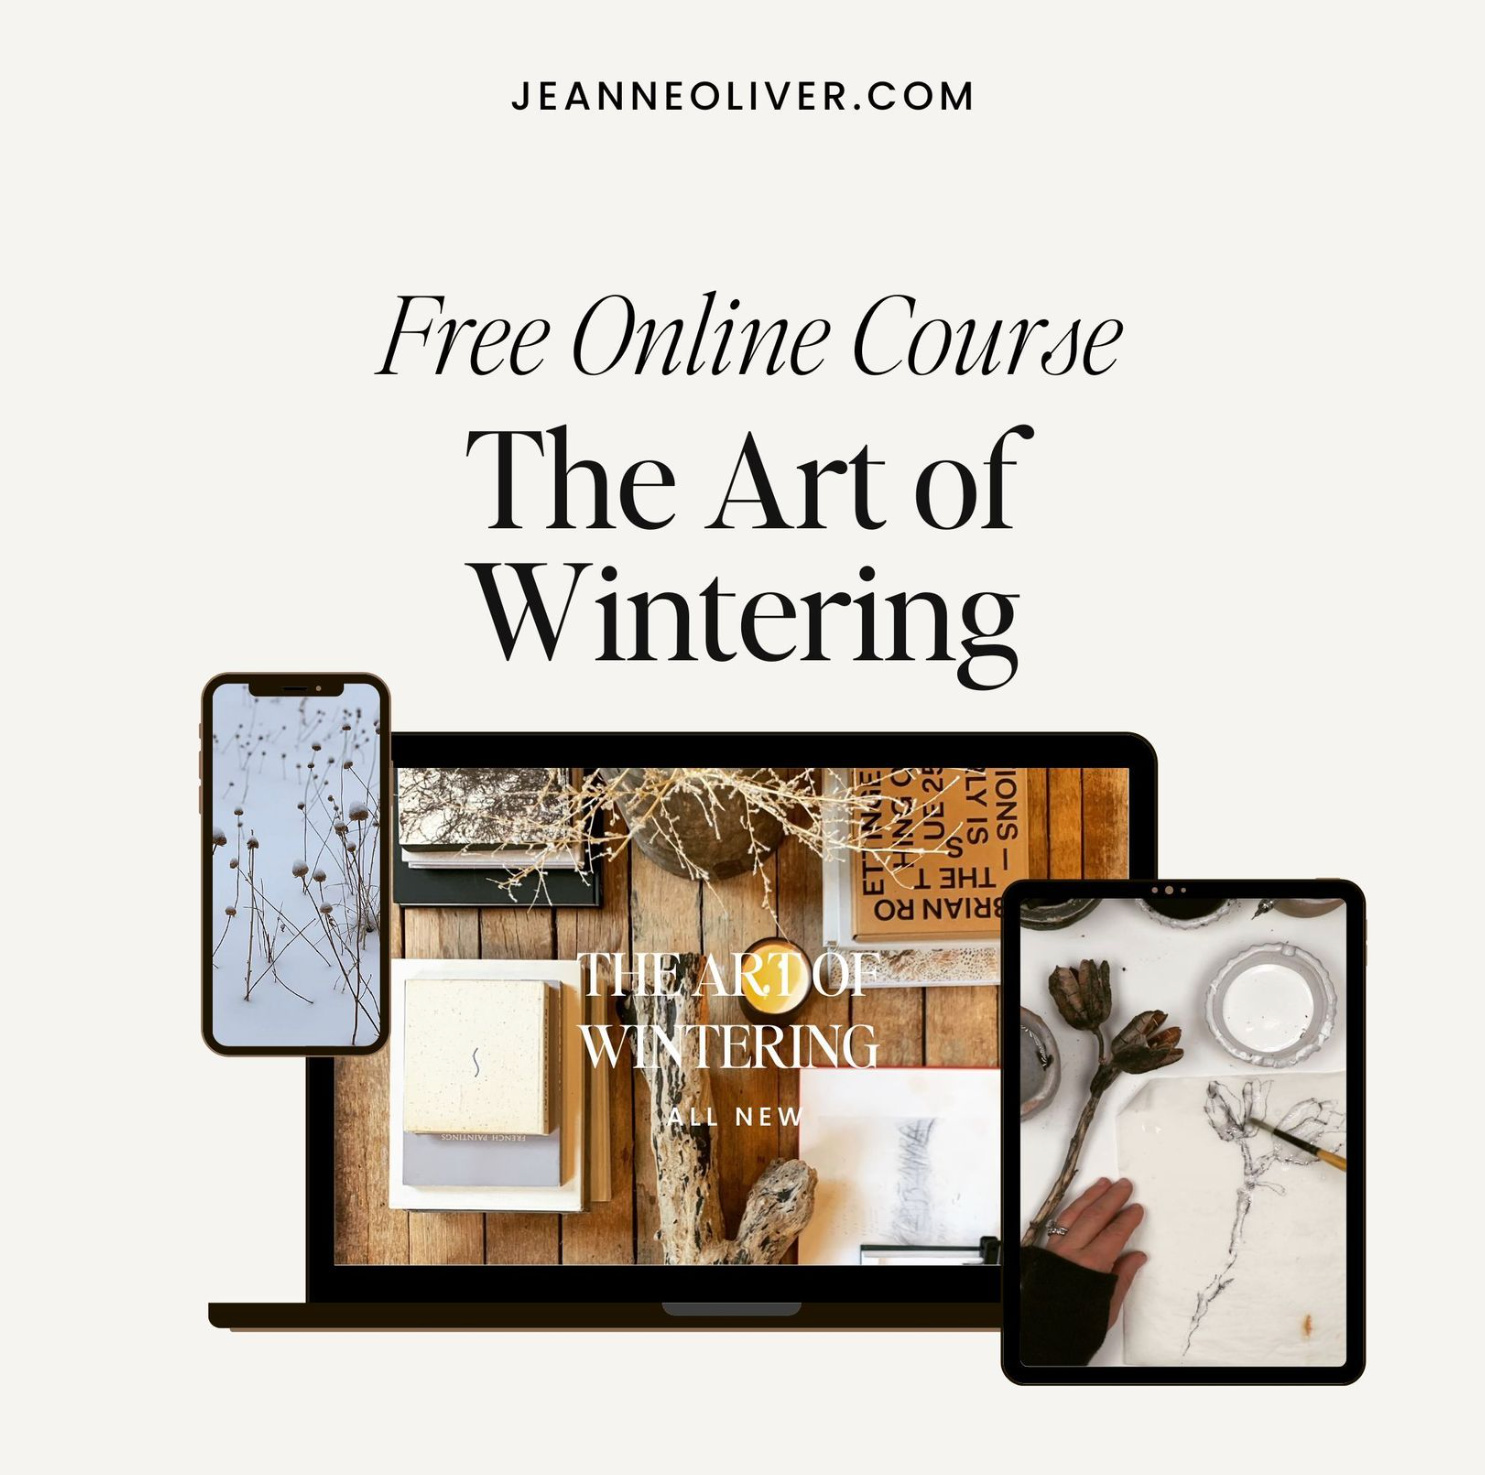 The Art of Wintering | A Free Instant Access Course